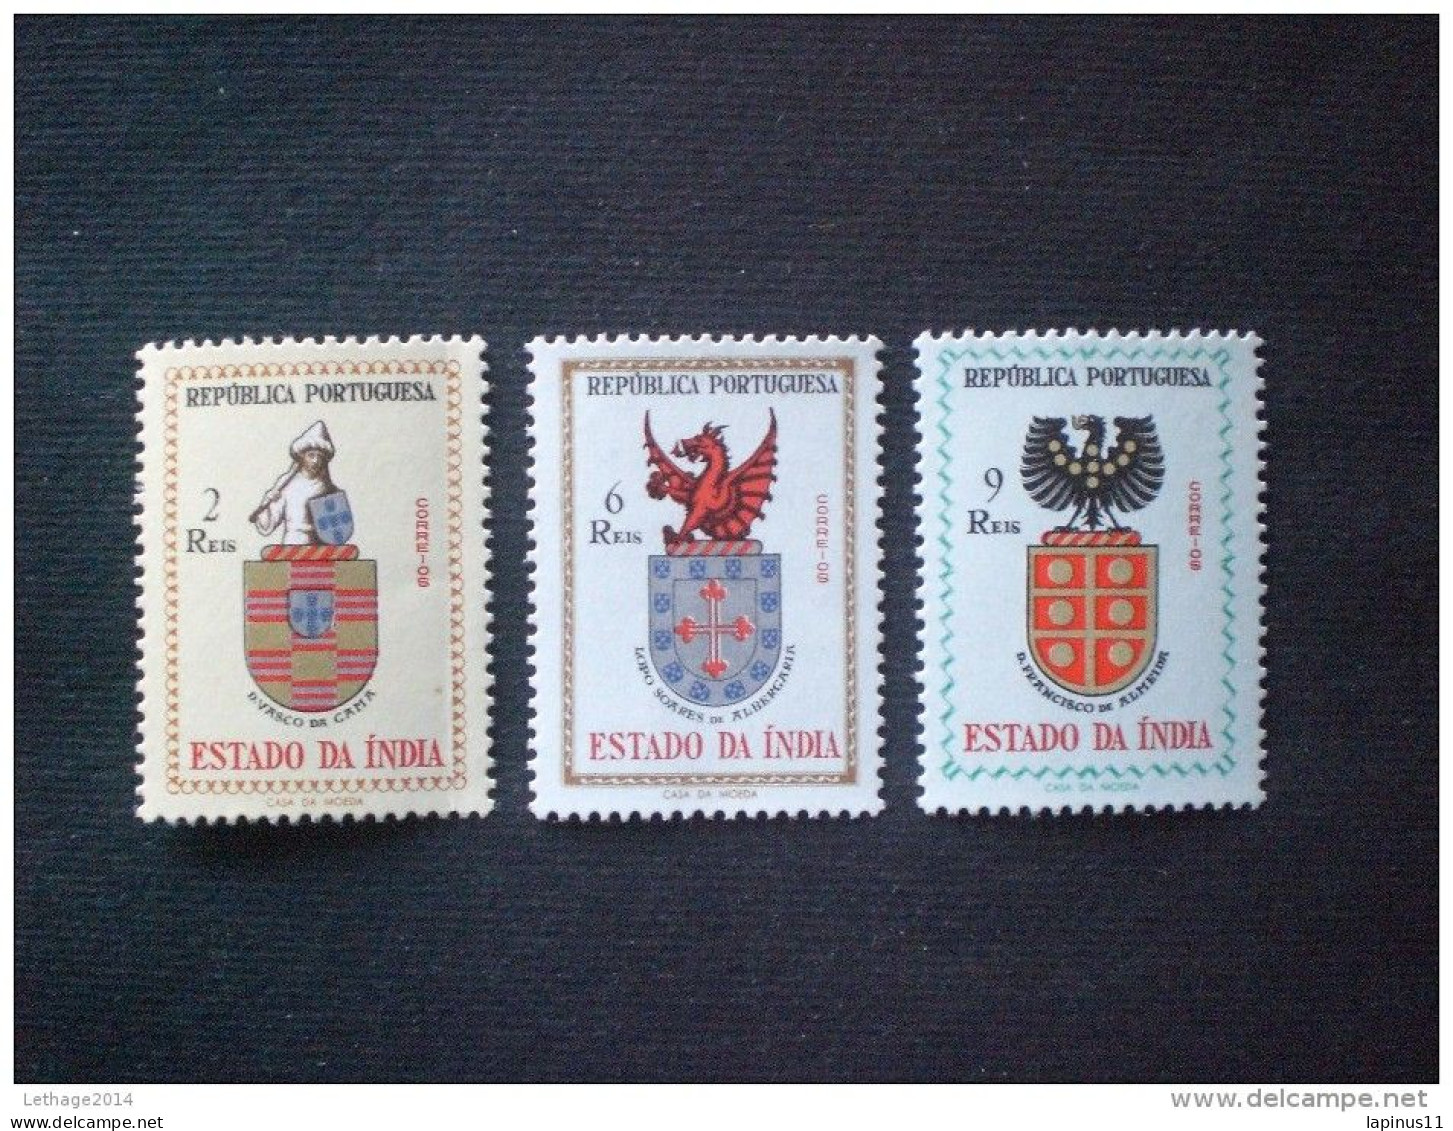 STAMPS INDIA PORTOGHESE 1958 Coat Of Arms MNH - Portugiesisch-Indien